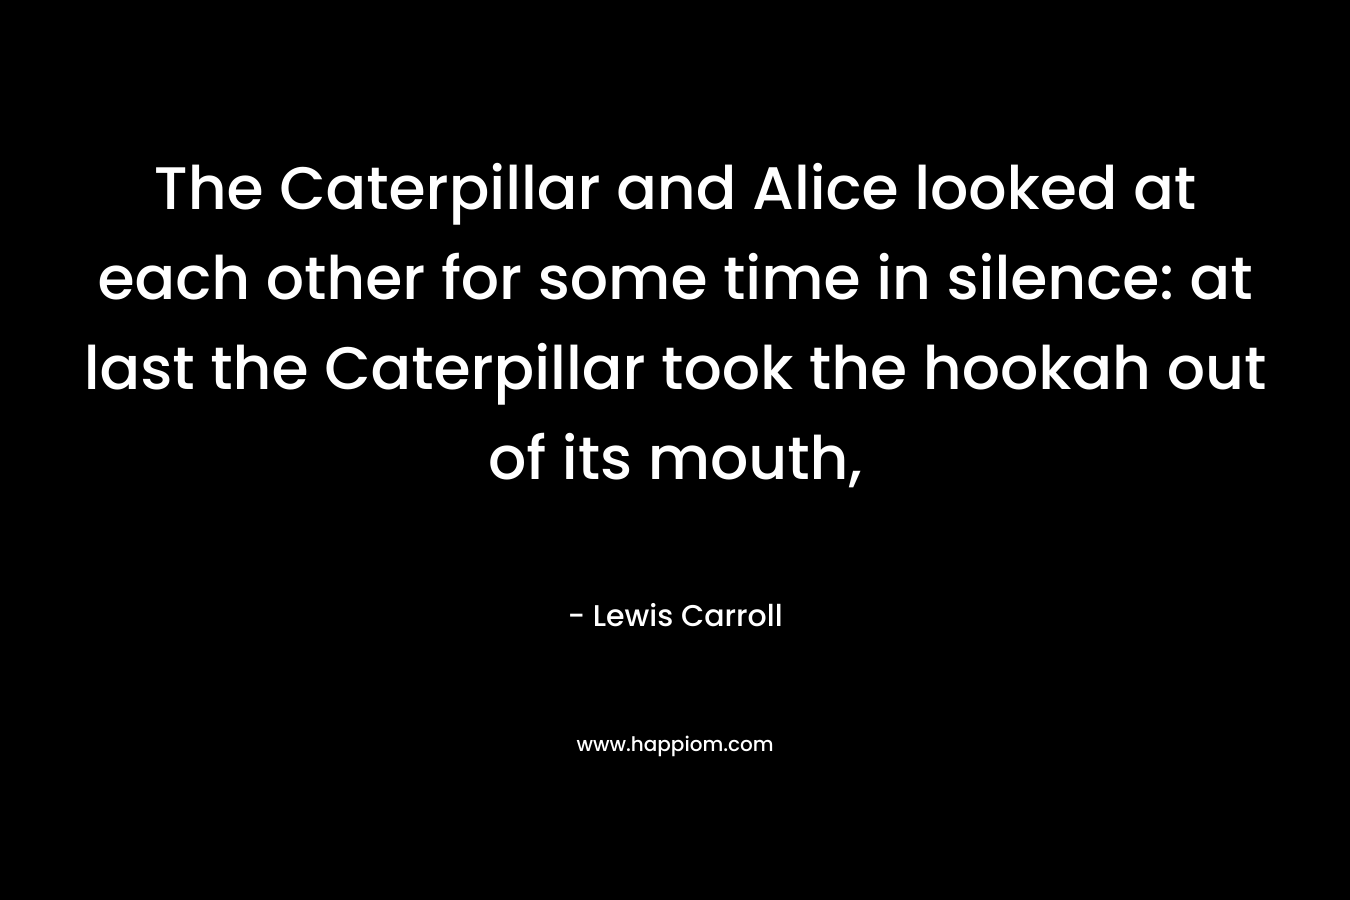 The Caterpillar and Alice looked at each other for some time in silence: at last the Caterpillar took the hookah out of its mouth, – Lewis Carroll